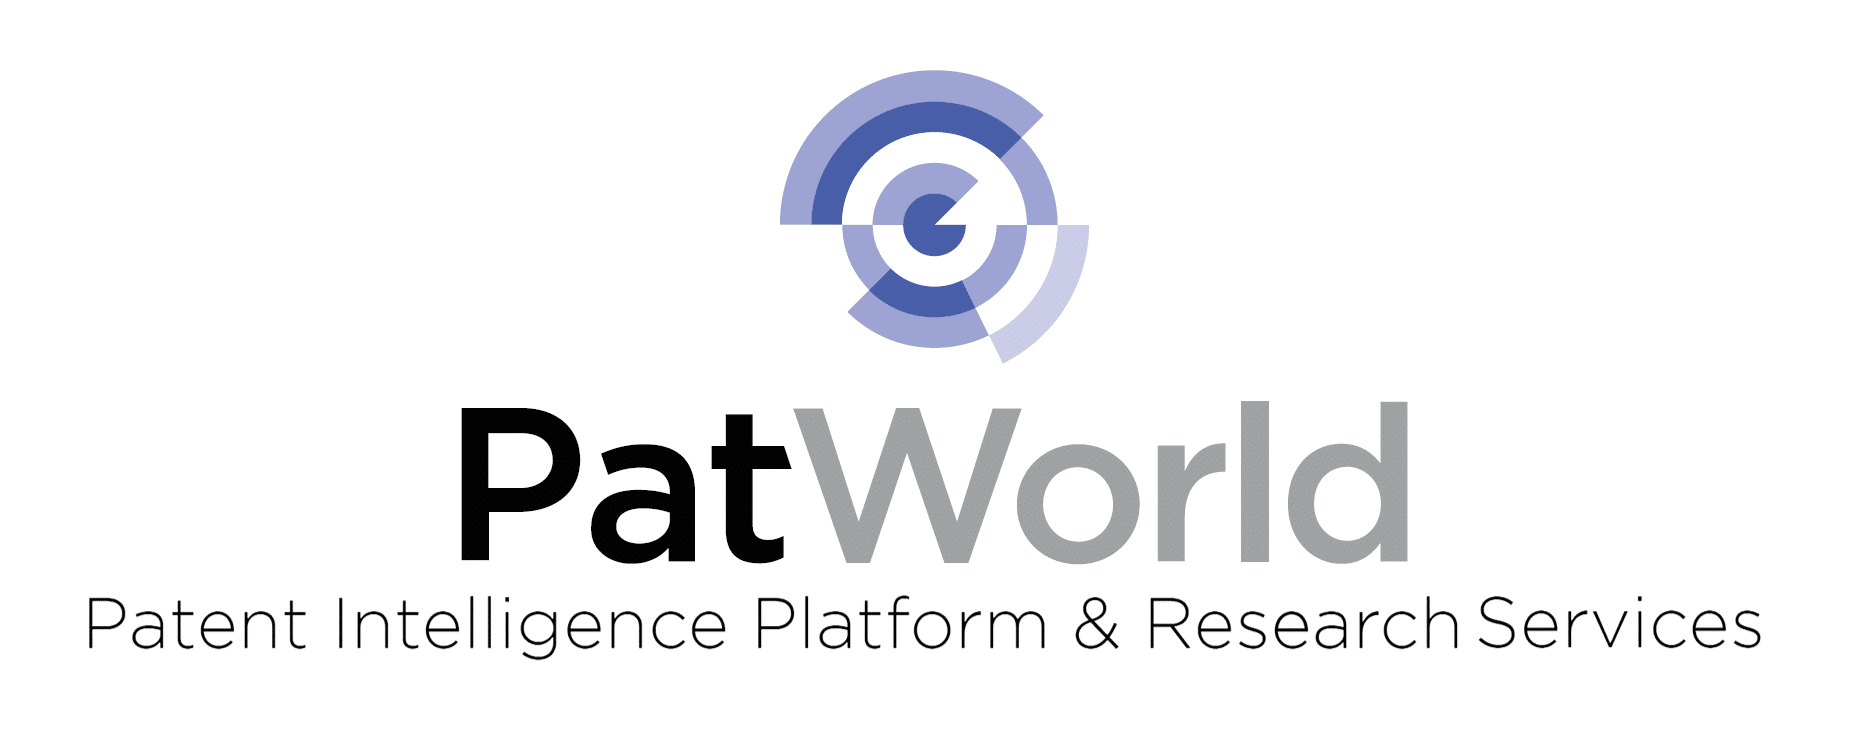 patworld-logo-stacked-without-patentseekers (higher resolution) V2